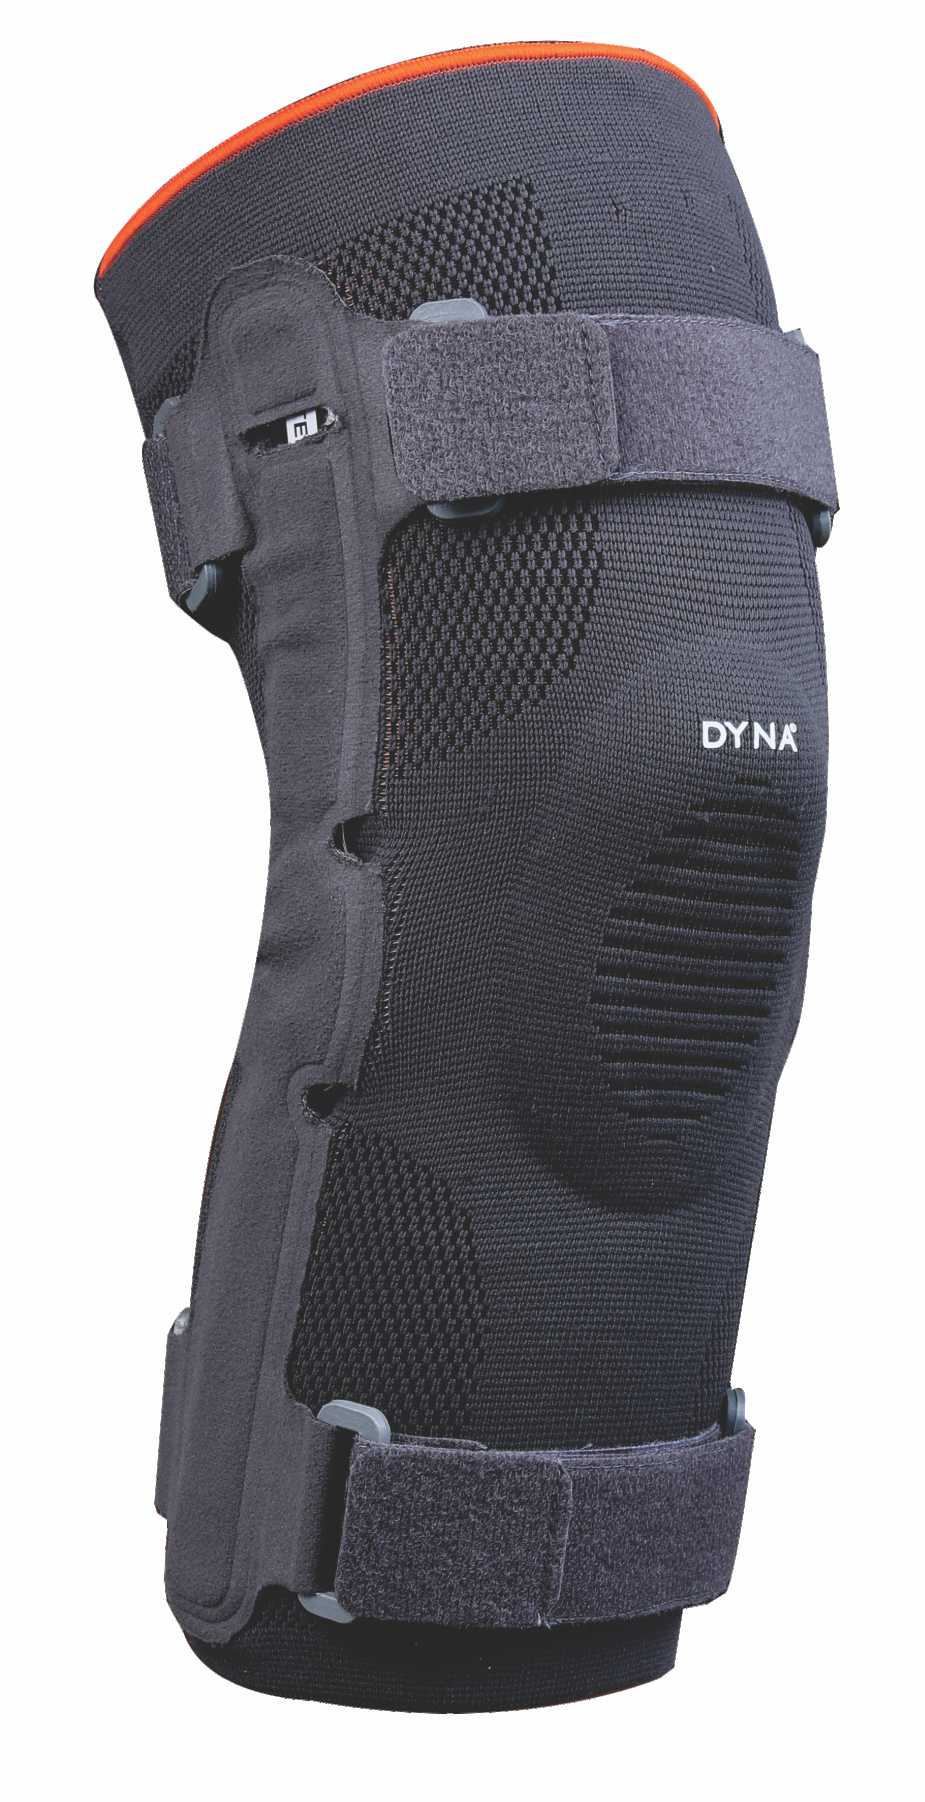 Dyna Knee Brace Special Knee Support - Buy Dyna Knee Brace Special Knee  Support Online at Best Prices in India - Fitness